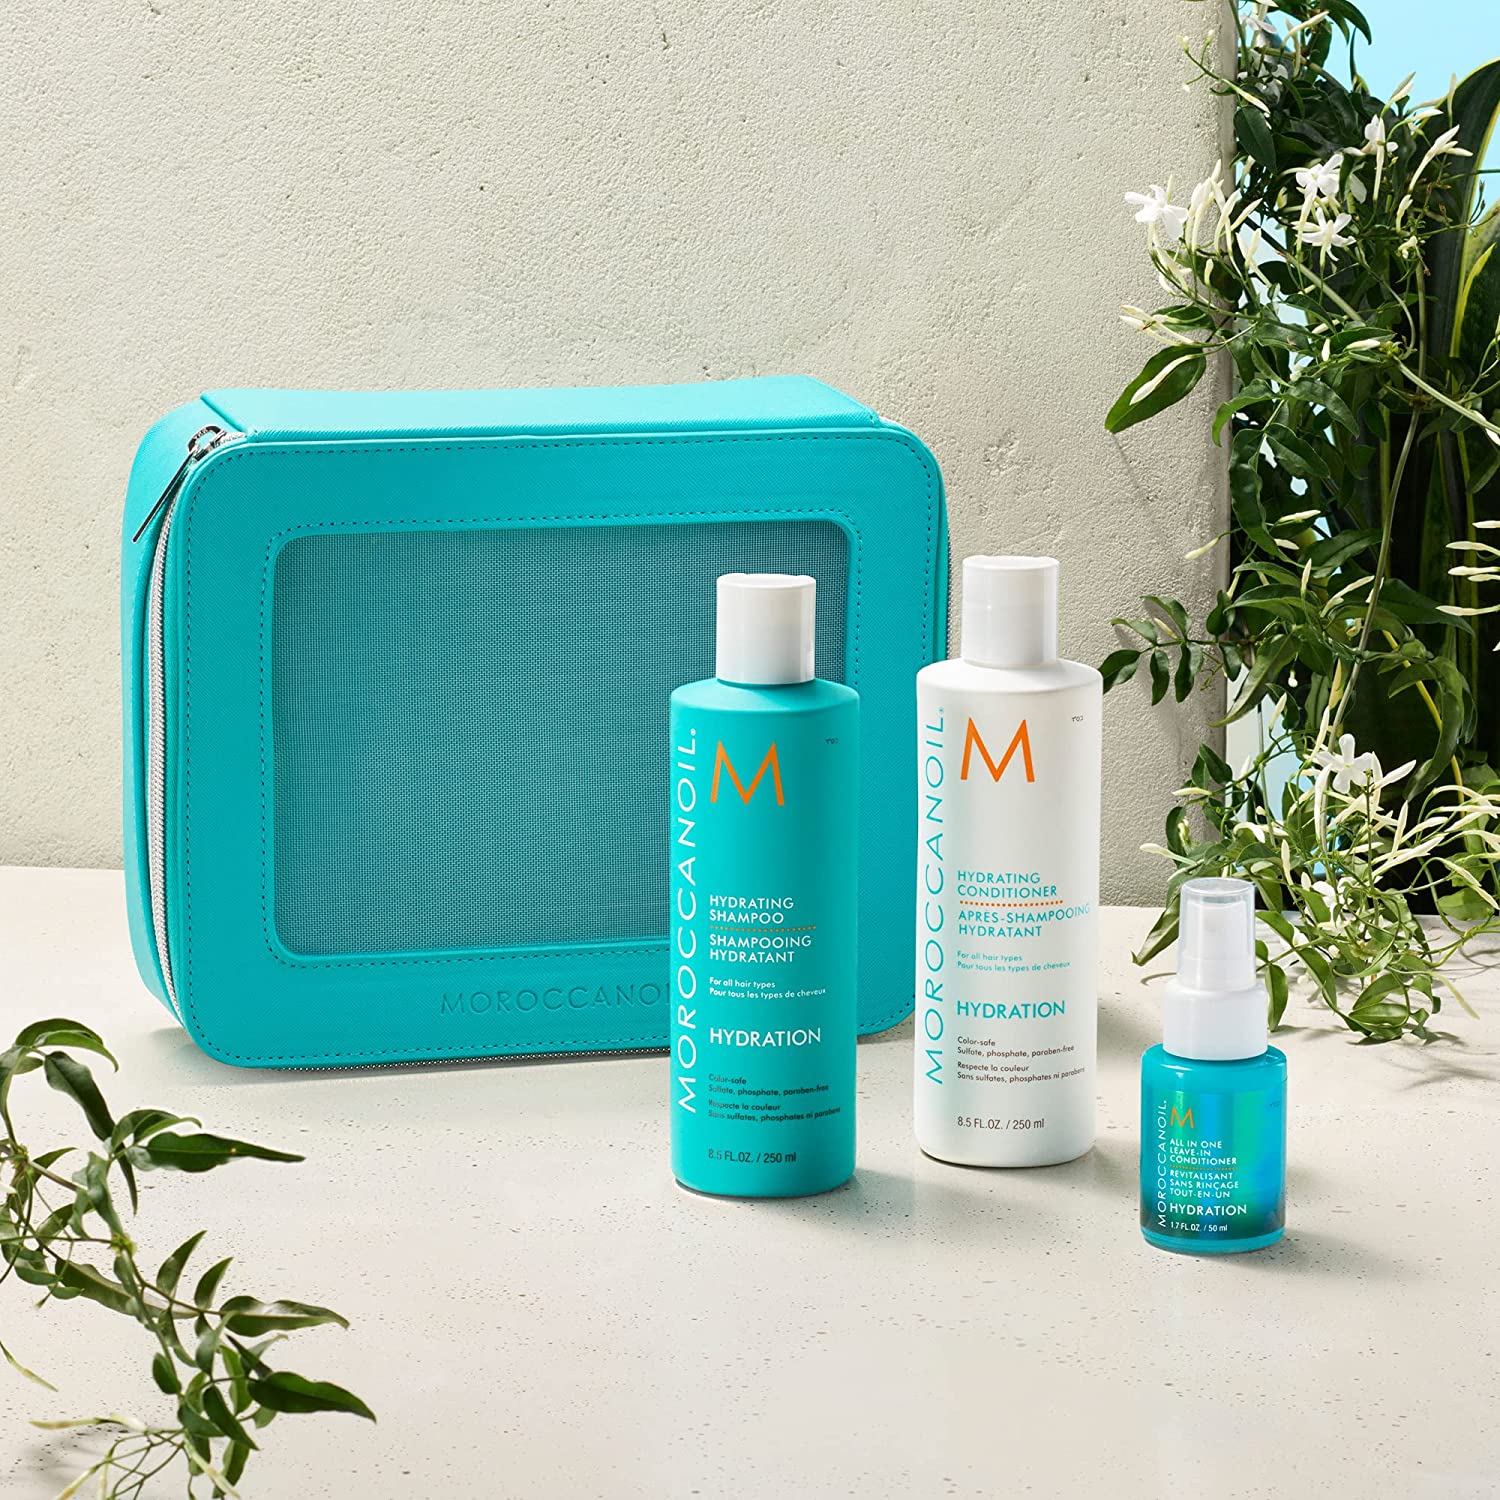 Moroccanoil Hydration Gift Set at Discounted Price